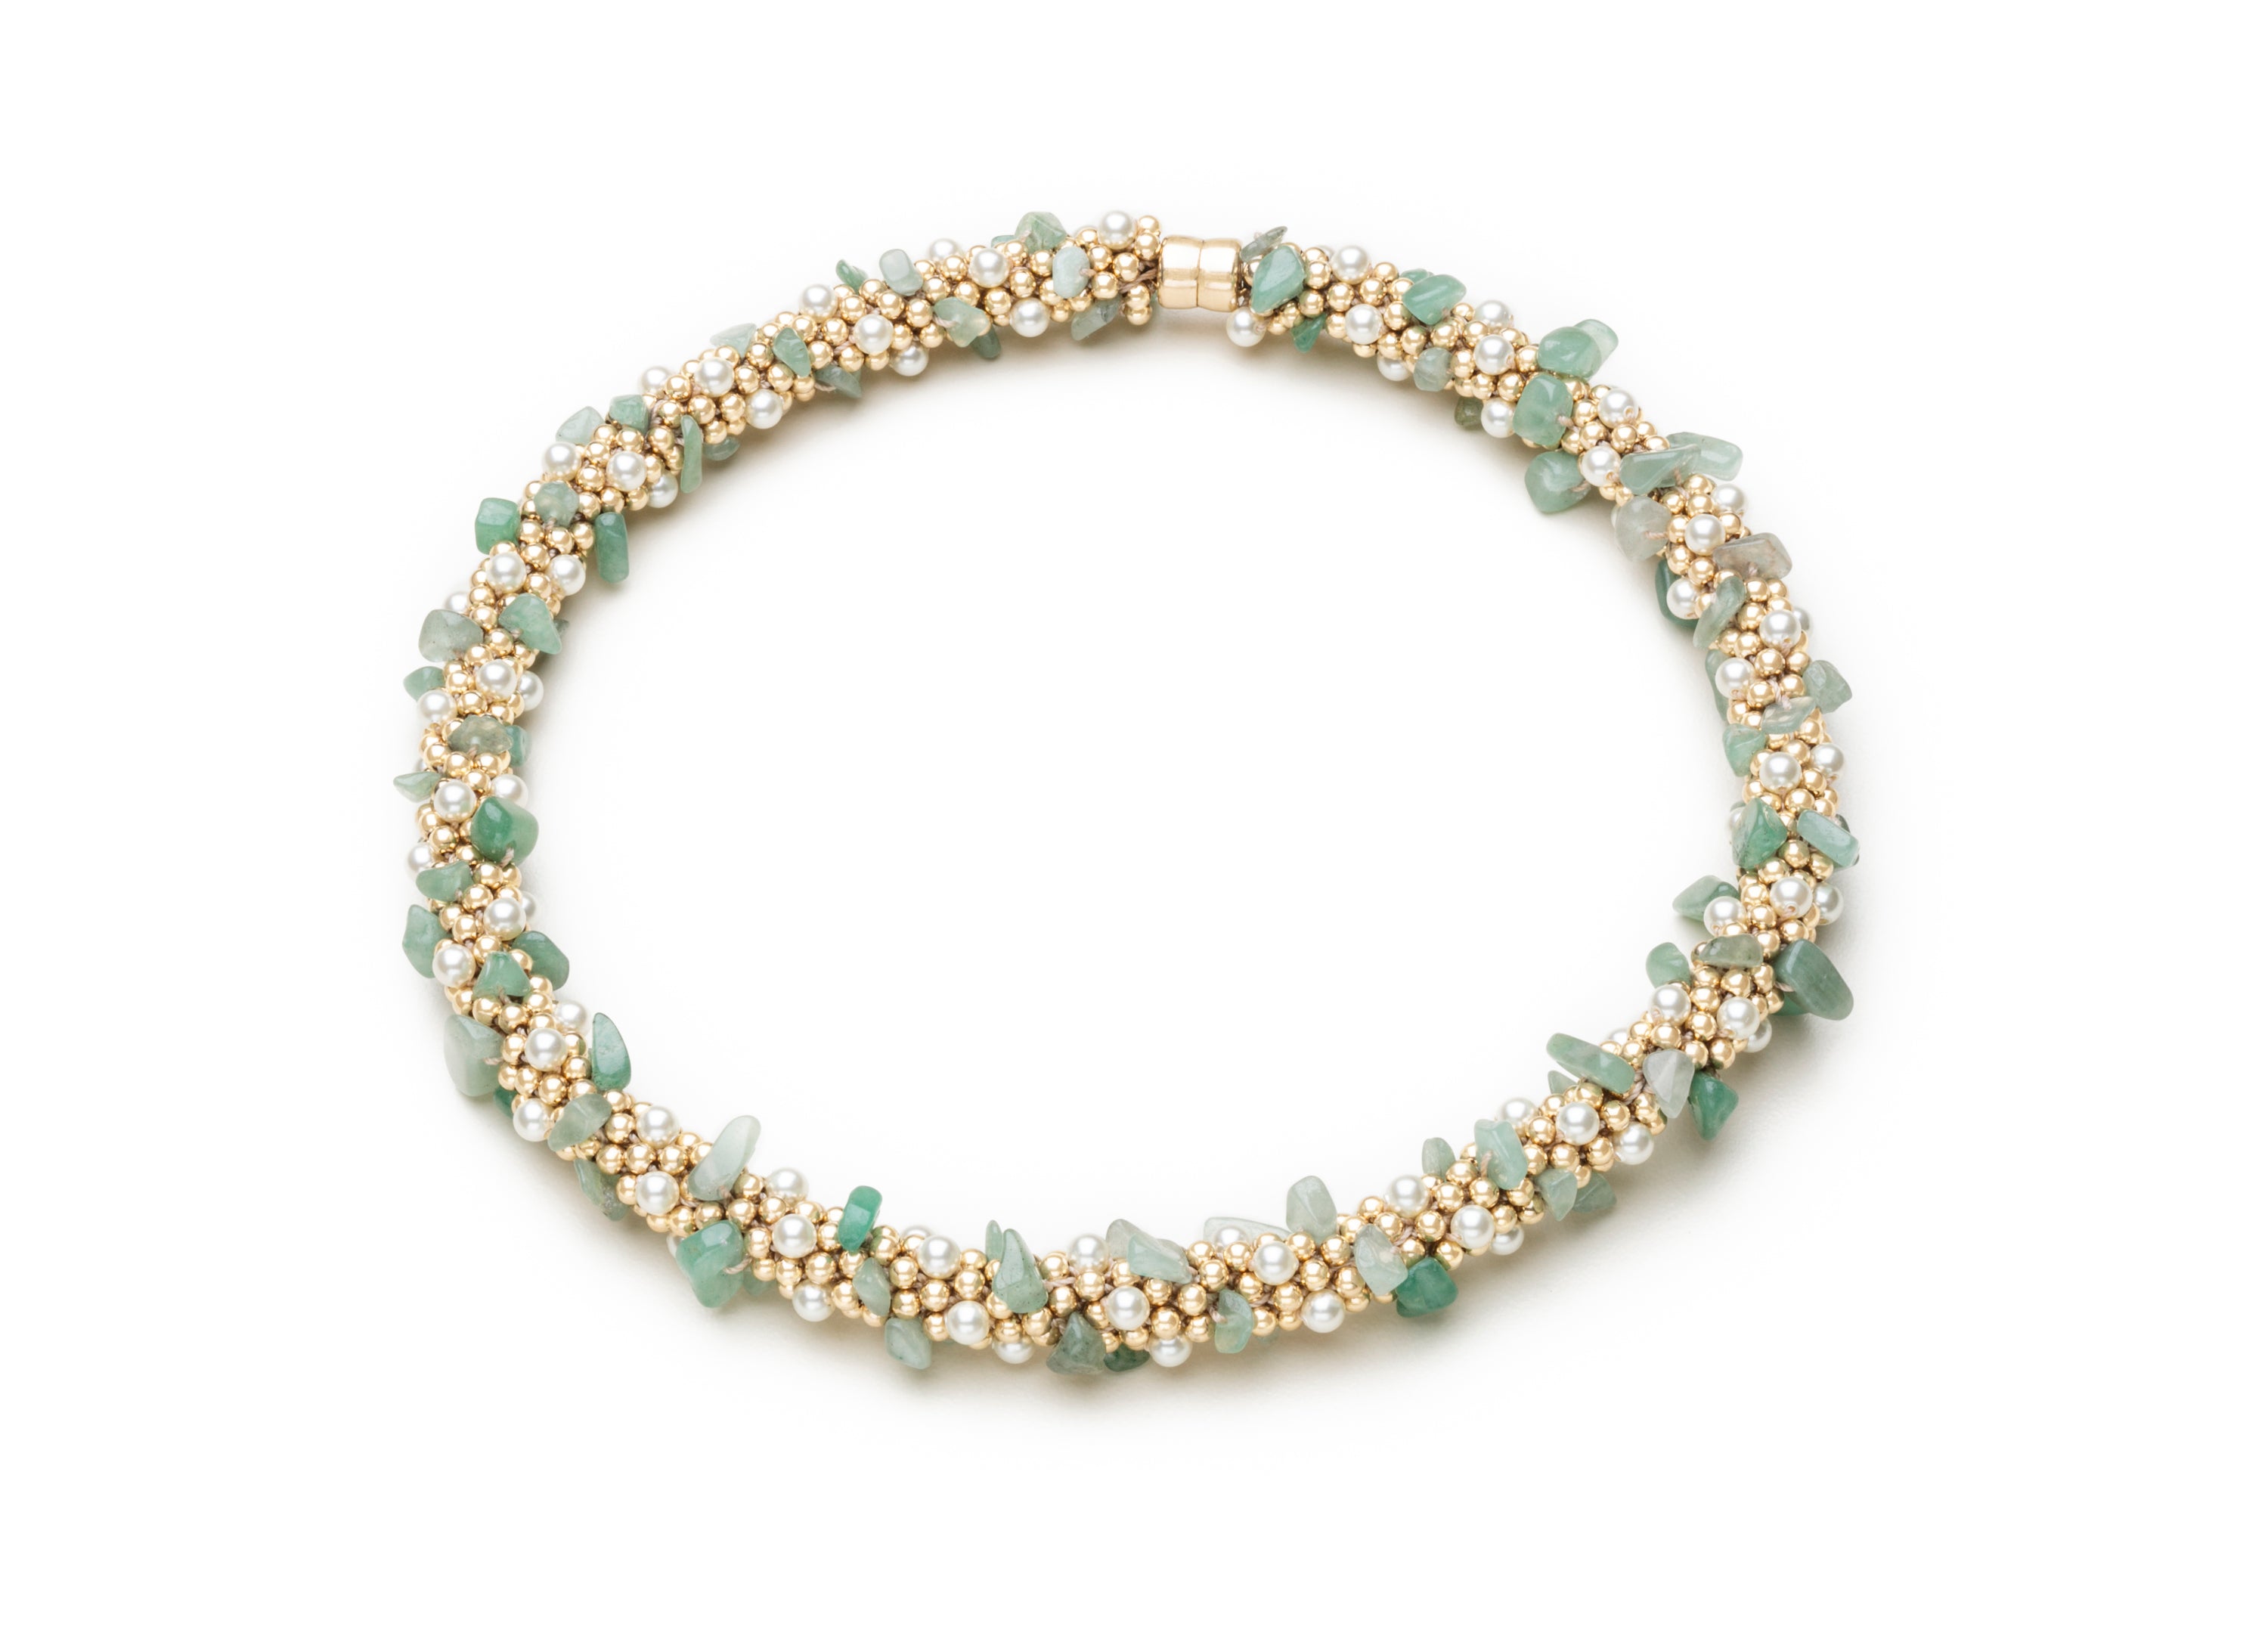 A Pearl, Aventurine and Gold Necklace